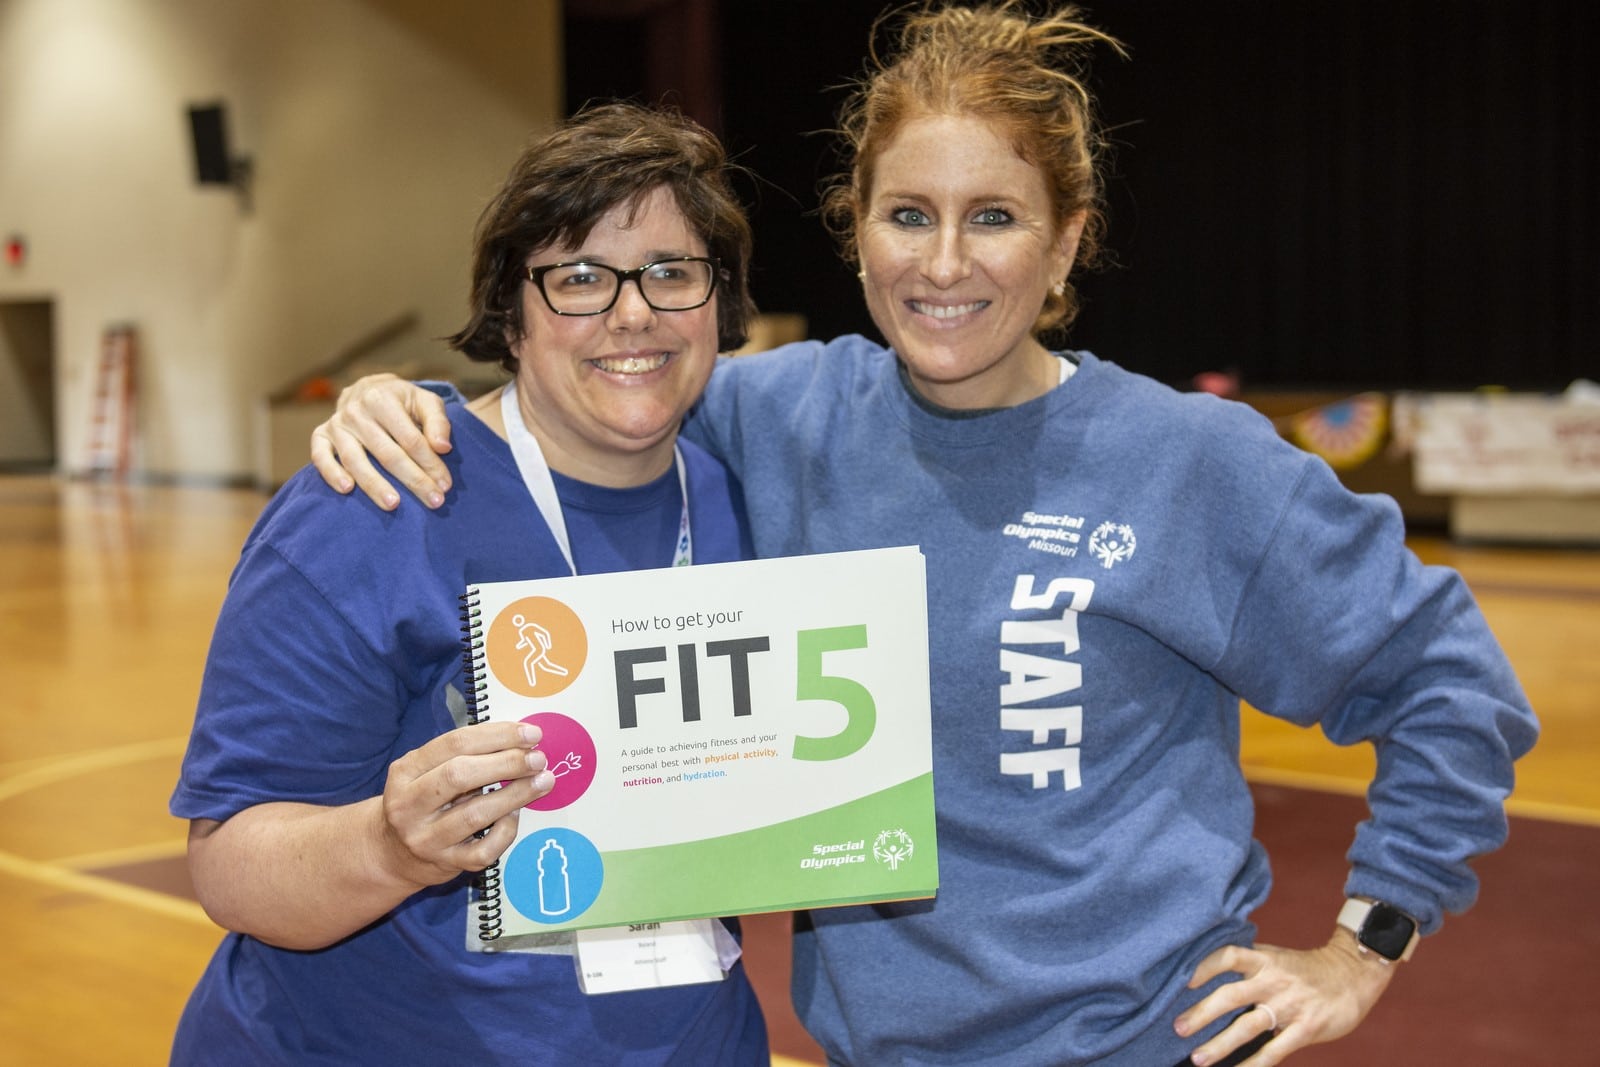 An athlete and staff member pose for a photo with a handout labeled "Fit 5" in their hand